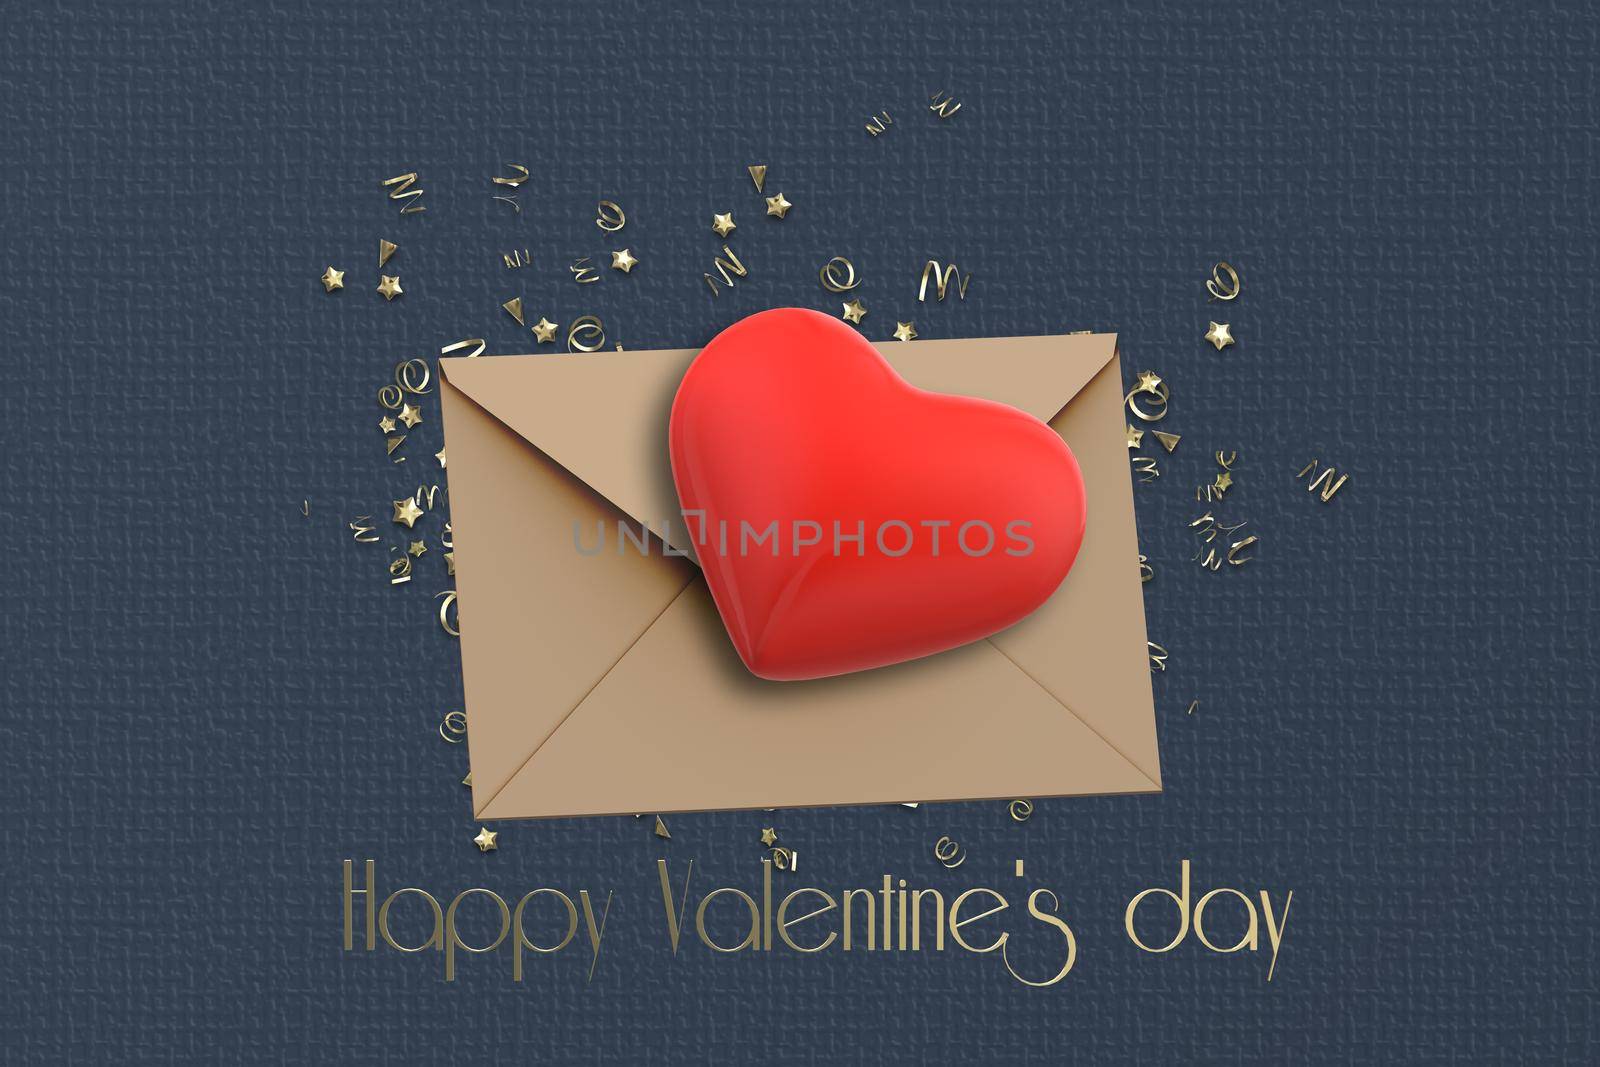 Happy Valentine's day with envelope red heart gold confetti gold text Happy Valentine's day. 3D render